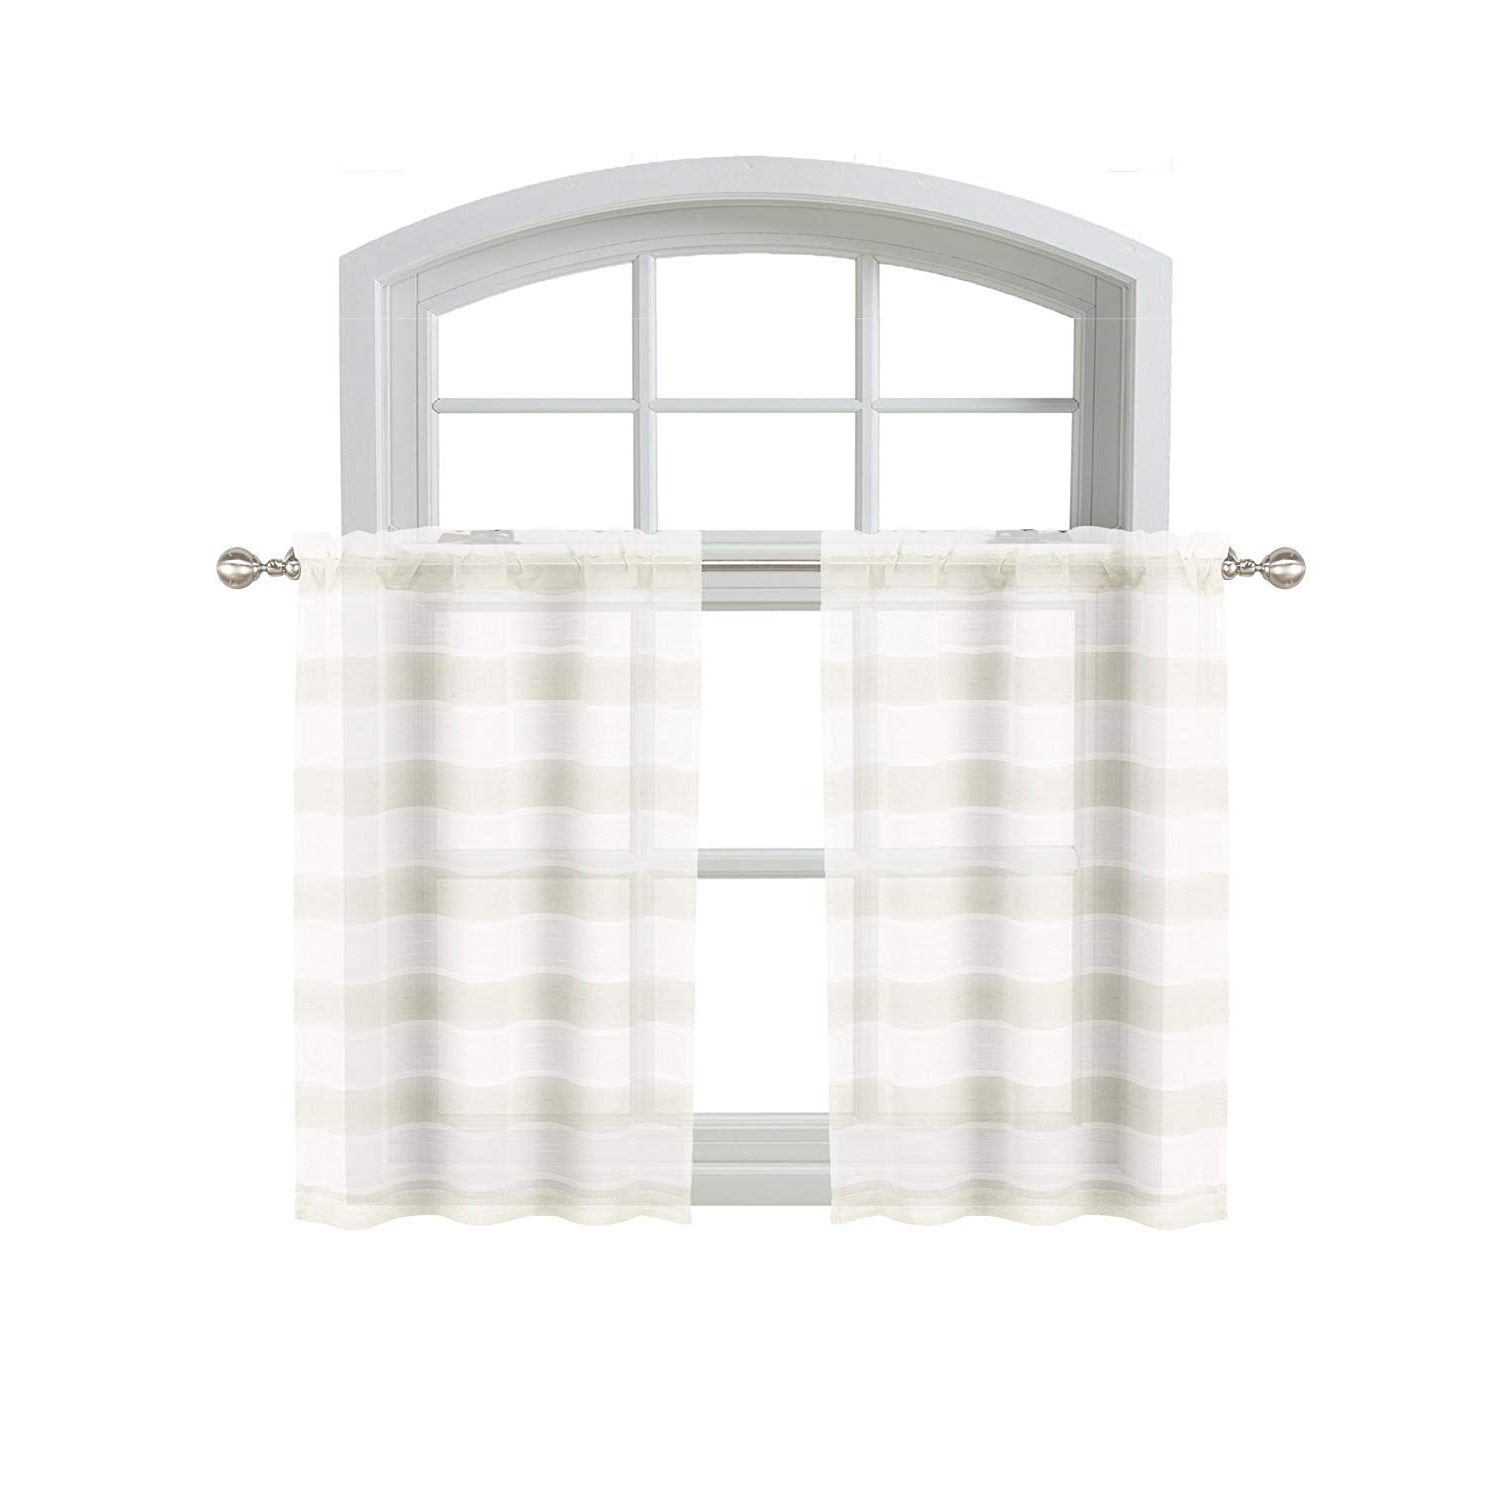 Dakota Window Curtain Tier Pair And Valance Sets In Favorite Bathroom And More Dakota Collection 2 Piece Sheer Window Curtain Café/tier  Set: White And Linen/beige Stripe Design (pair (2) Tiers 24in L Each) (View 10 of 20)